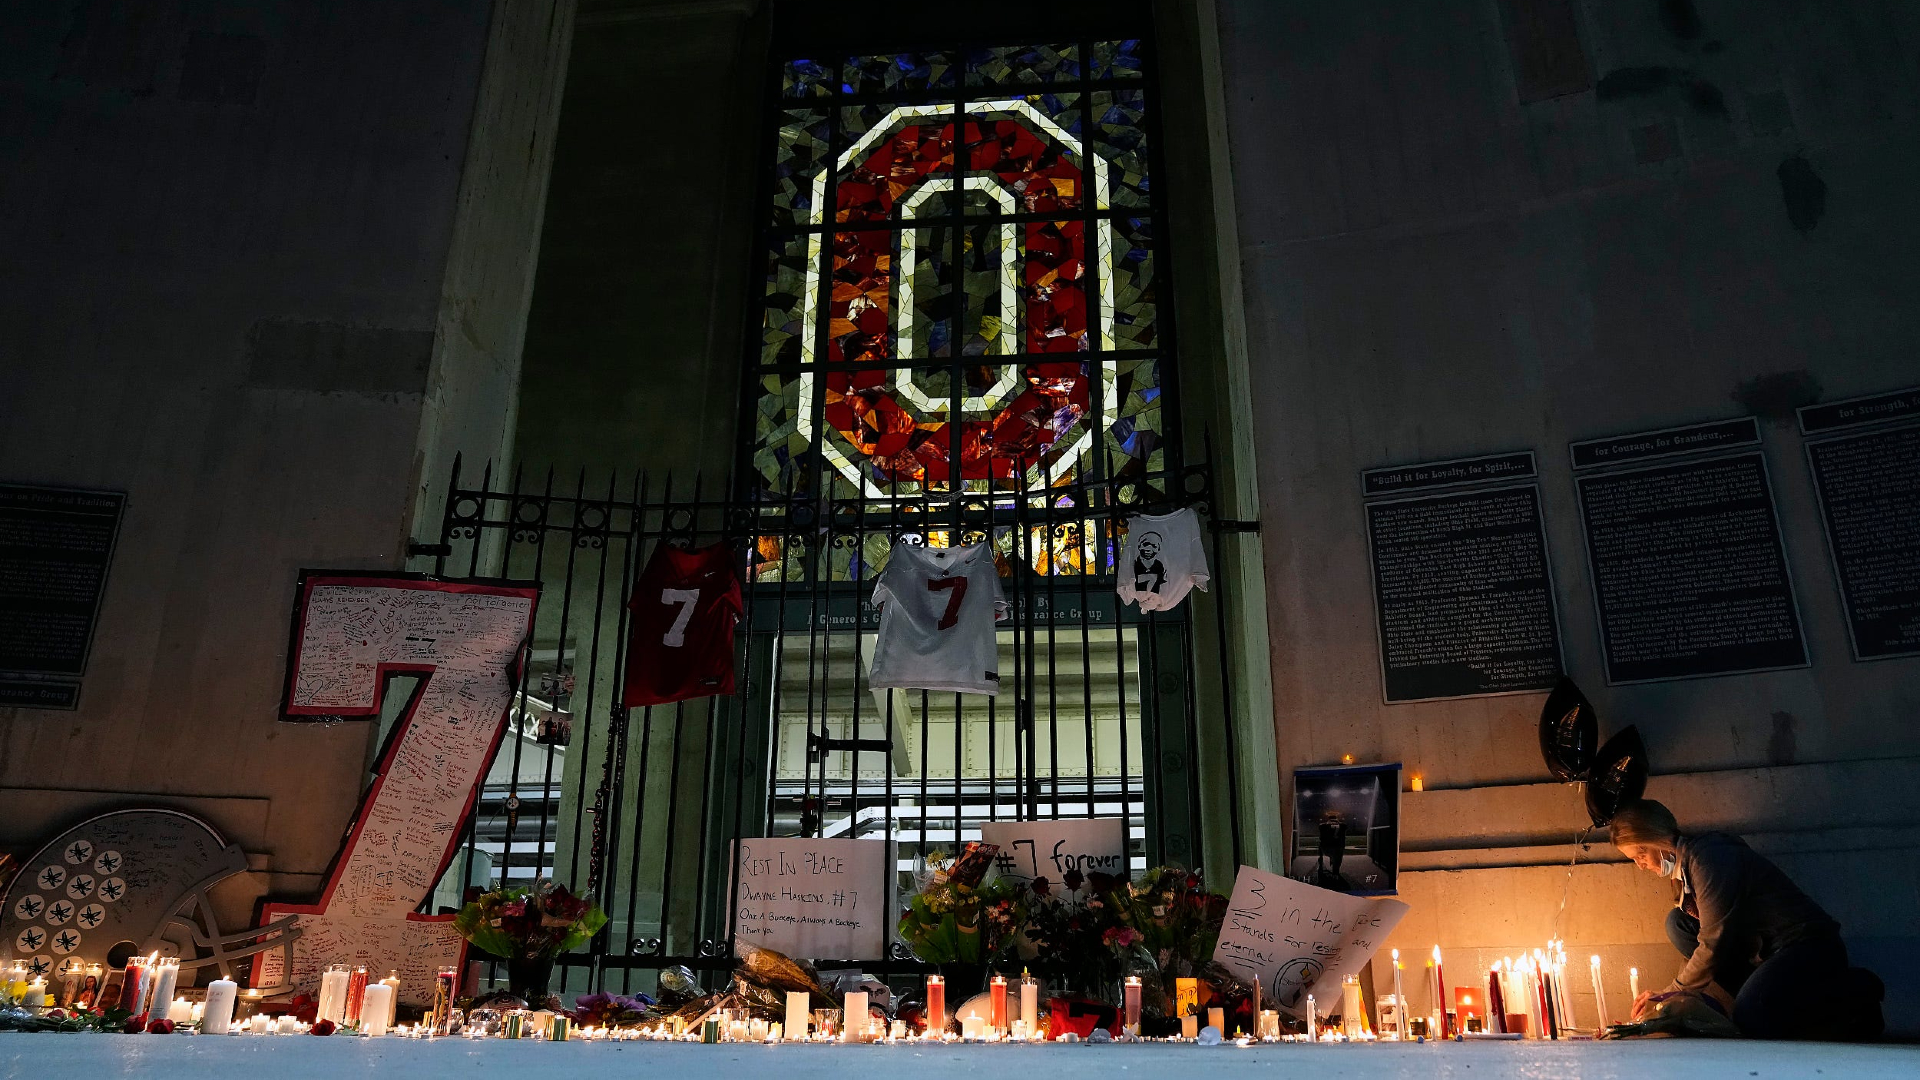 Candlelight vigil for the late Dwayne Haskins